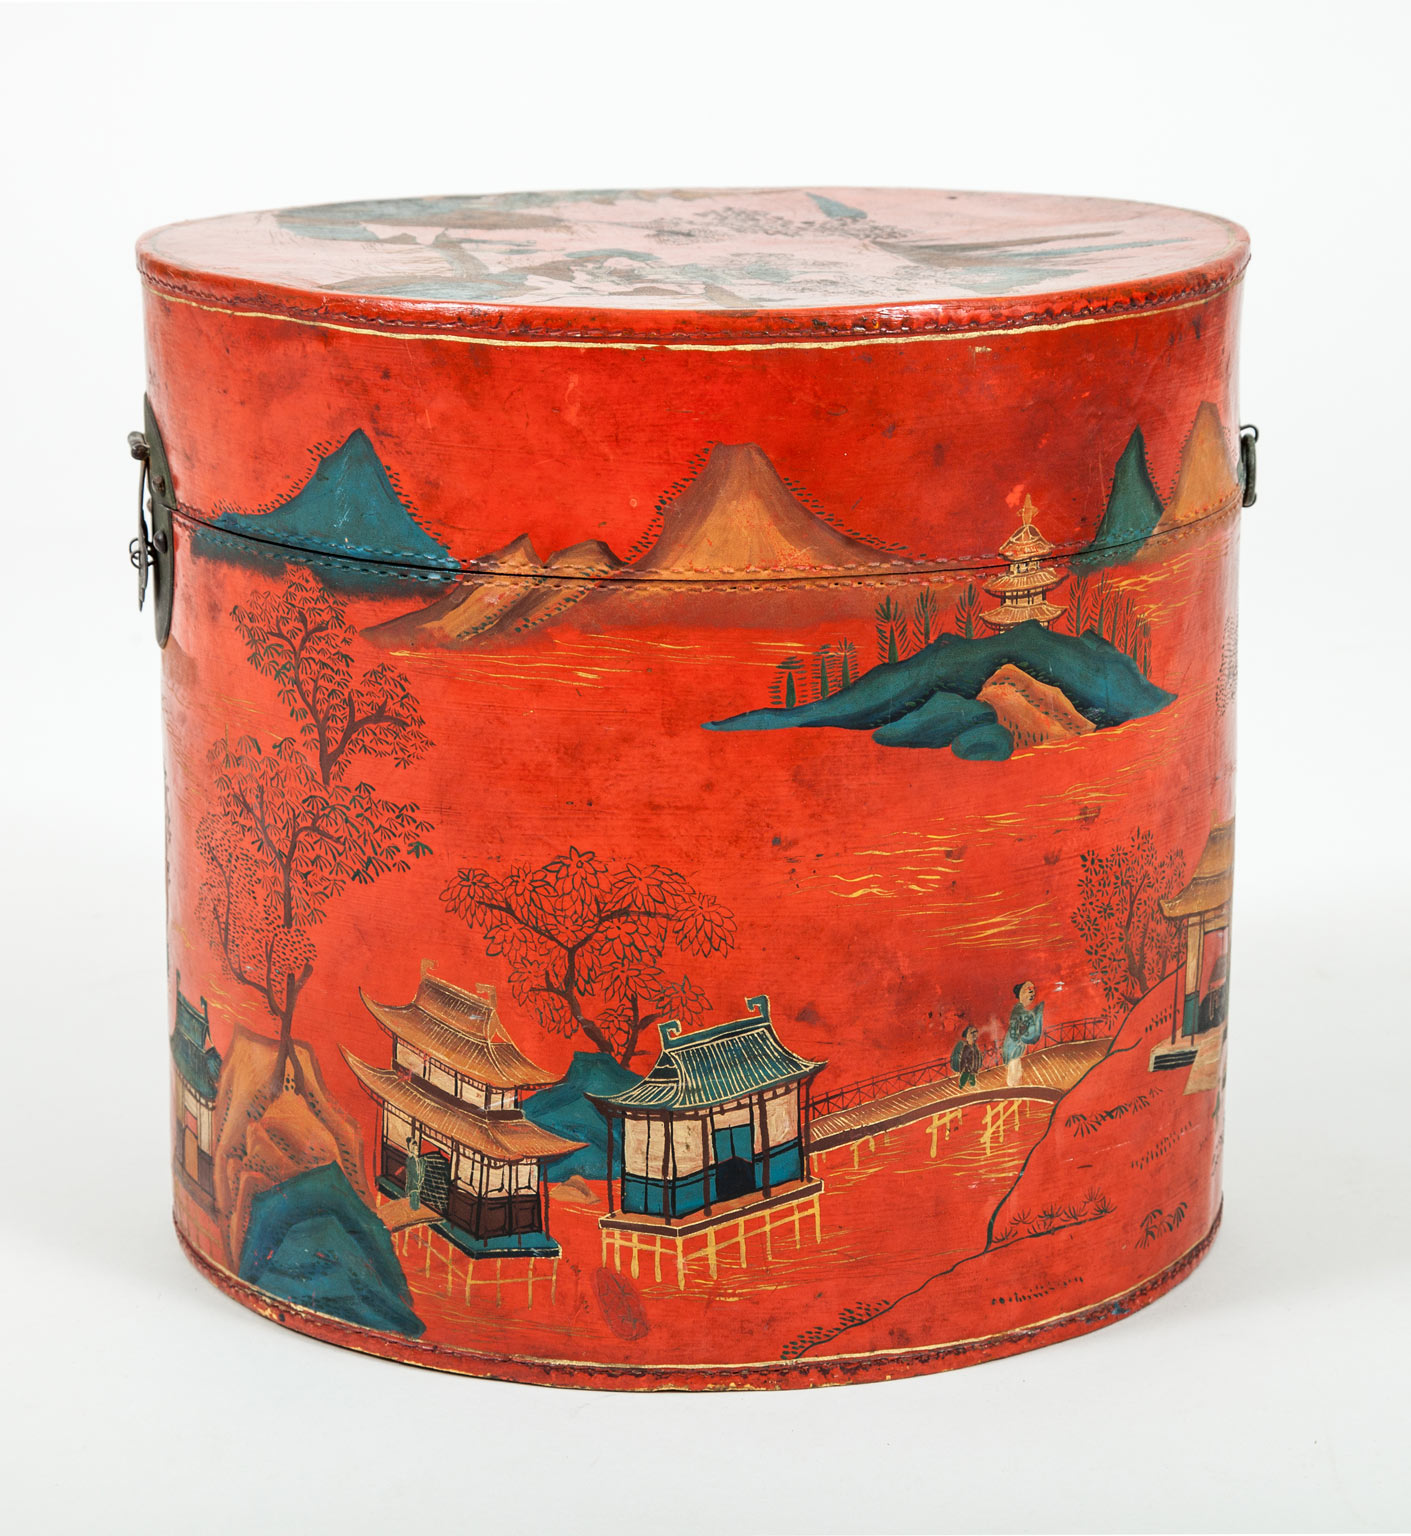 Hat Box Double Chinese Antique Leather Lacquered Decorative Box Brass Lock  And Lid Mandarin Antique Round Wooden Storage Box Decorative Item